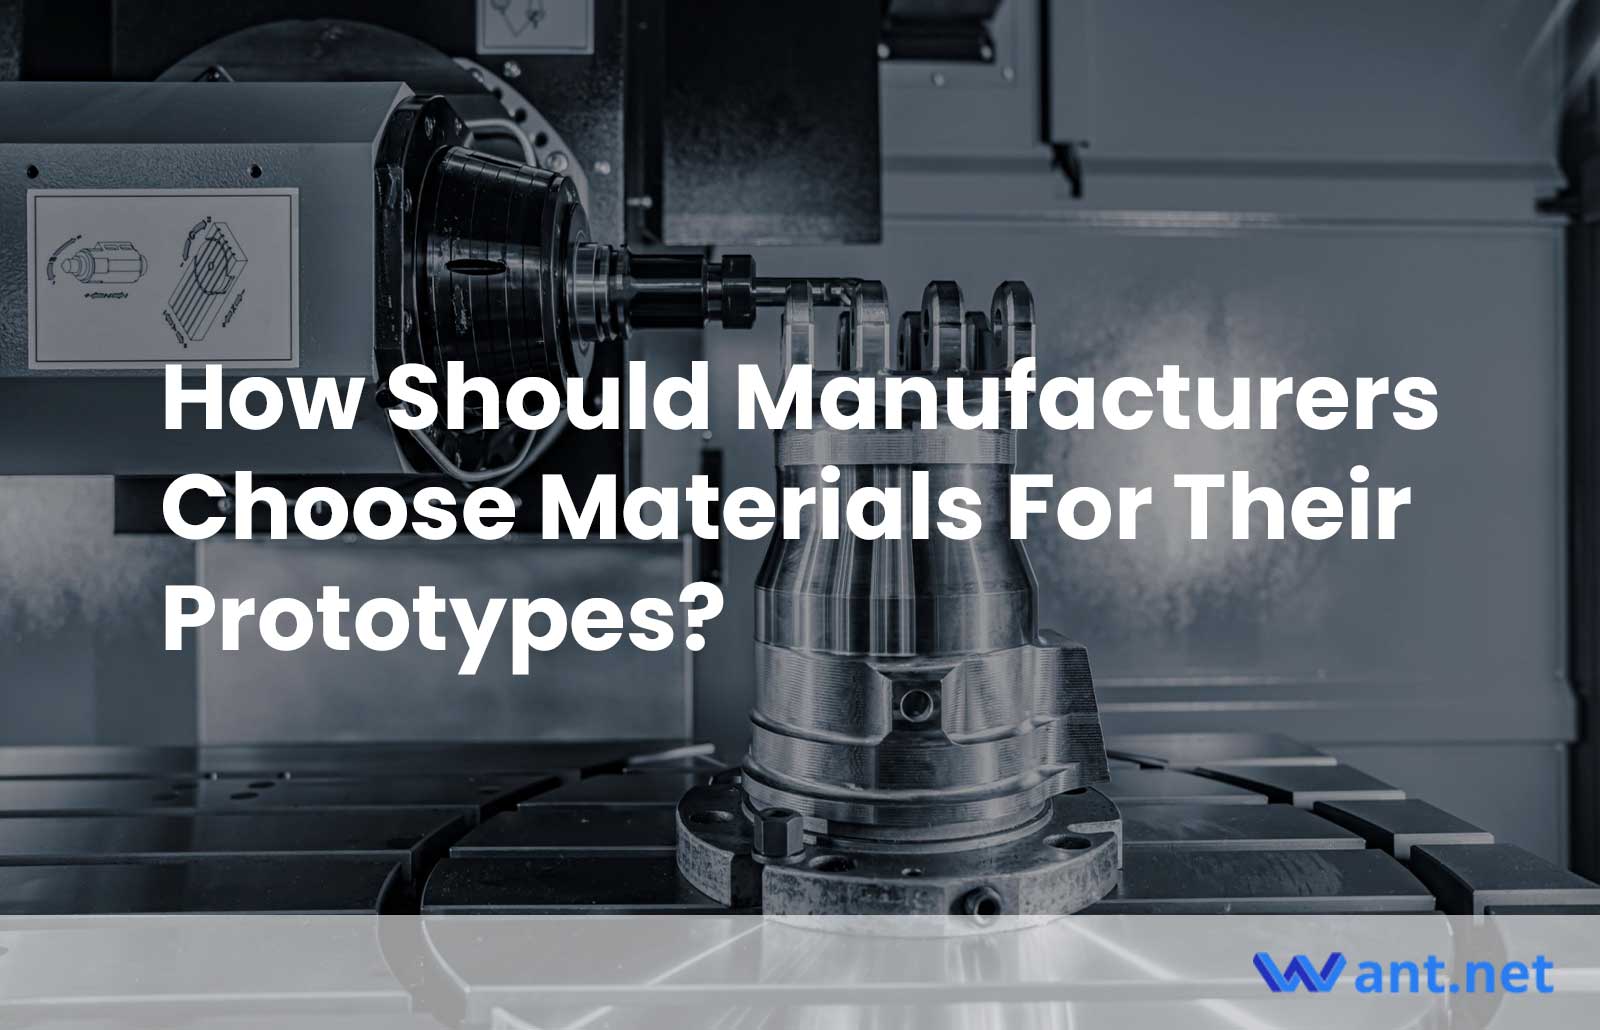 How Should Manufacturers Choose Materials For Their Prototypes?